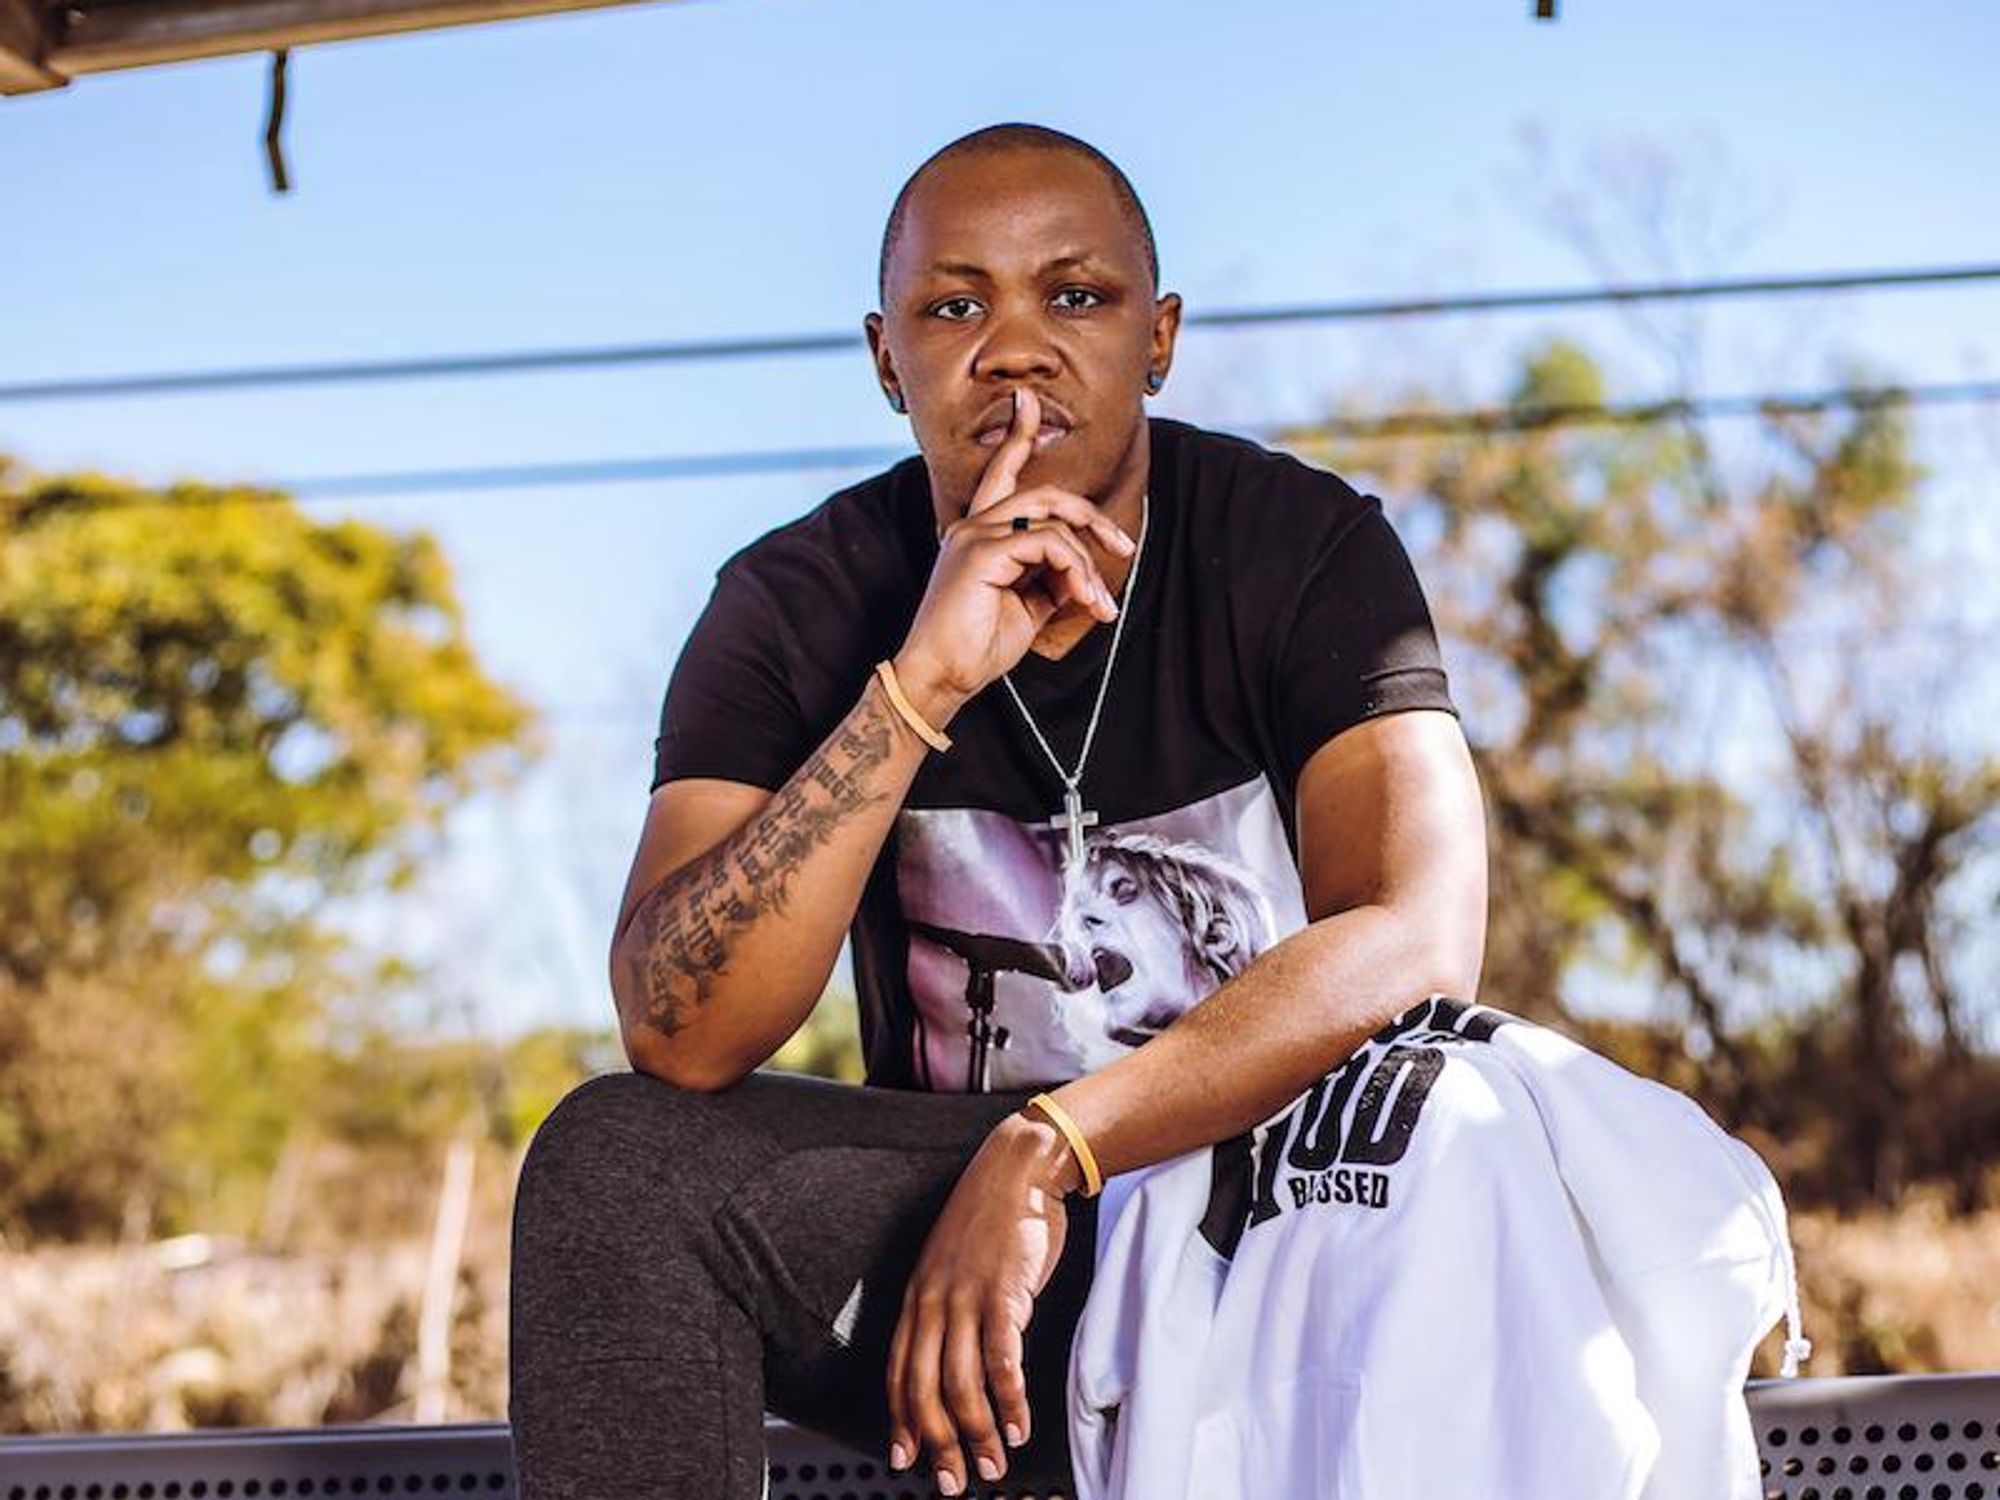 Interview: PDot O’s Recently Completed Trilogy of Albums Tells a Tragic Tale of Forbidden Love